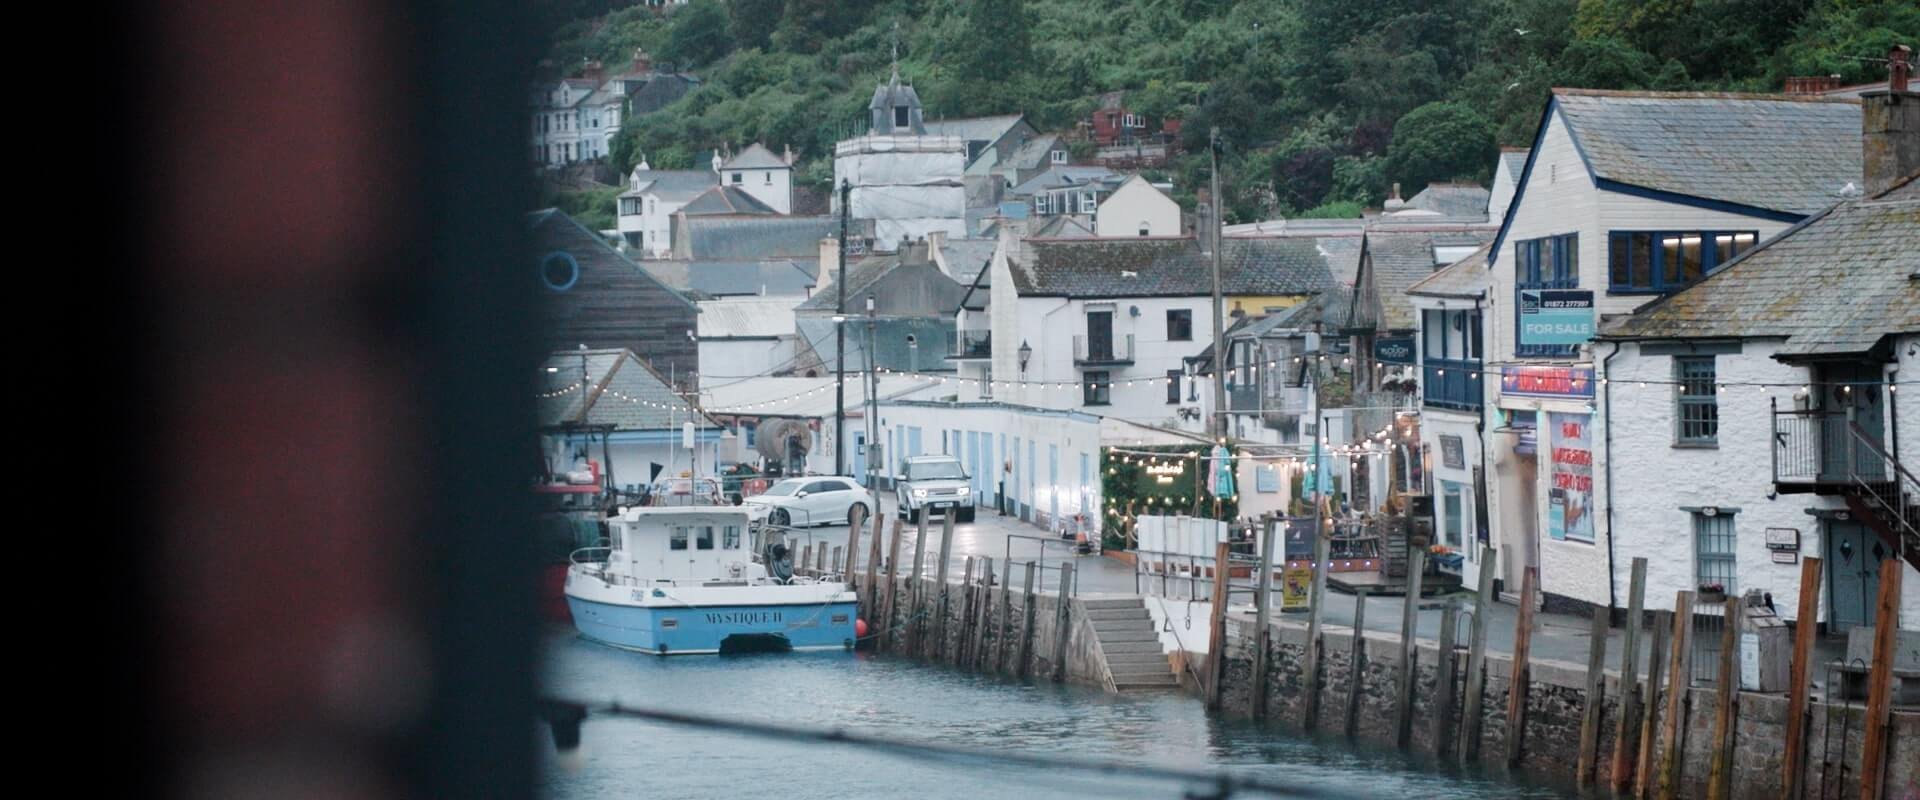 The fish markets on Looe harbour, as seen from the Sardine Factory